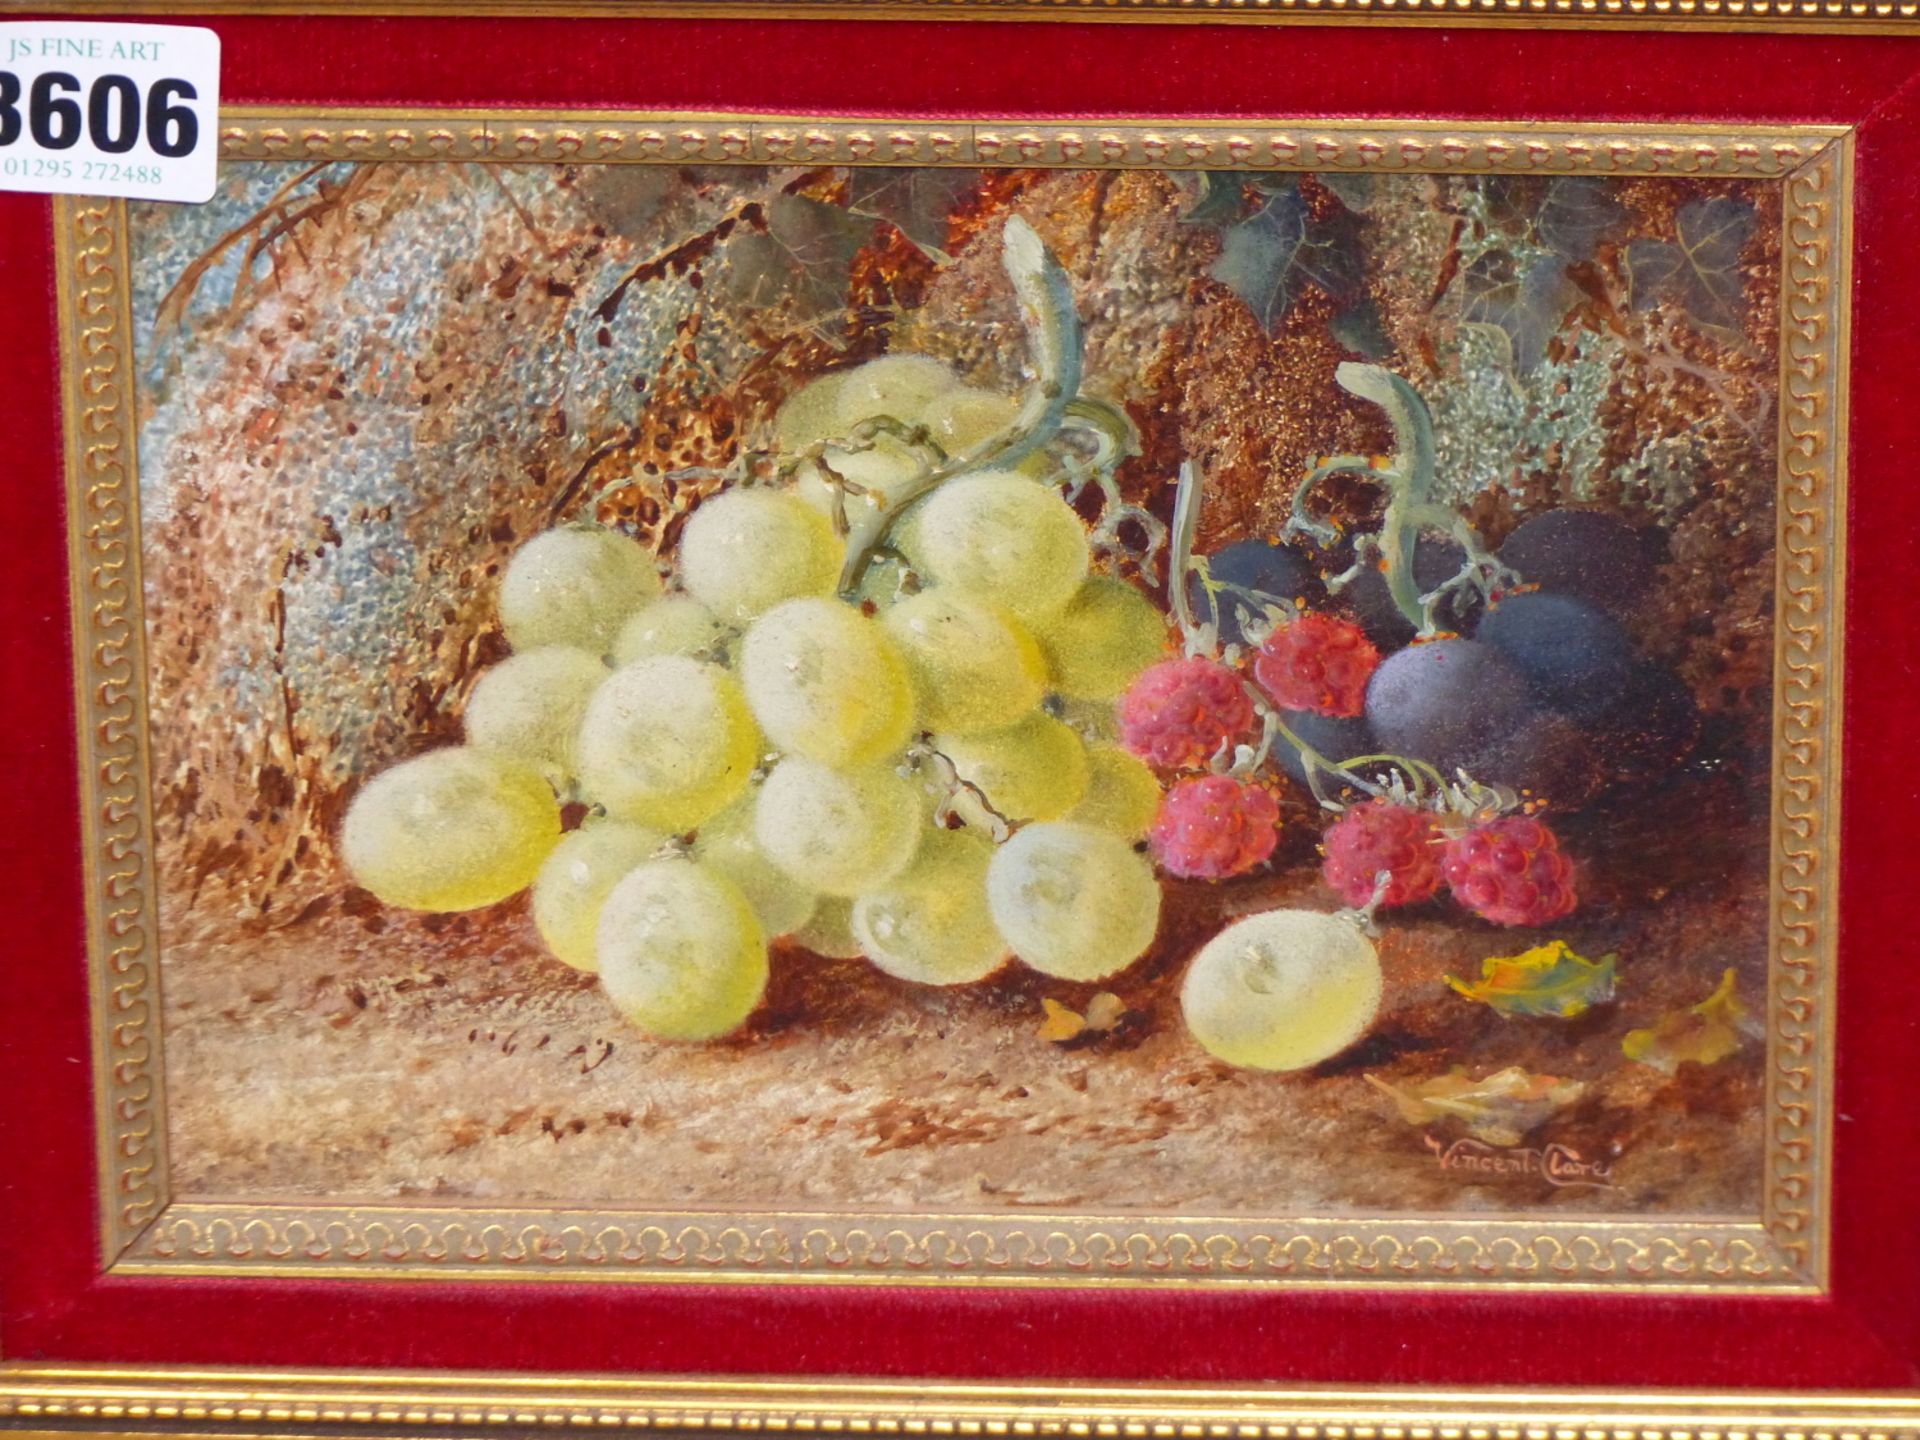 VINCENT CLARE (1855-1930) STUDY OF GRAPES AND RASPBERRIES, OIL ON CANVAS 19 X 13 cm. - Image 3 of 6